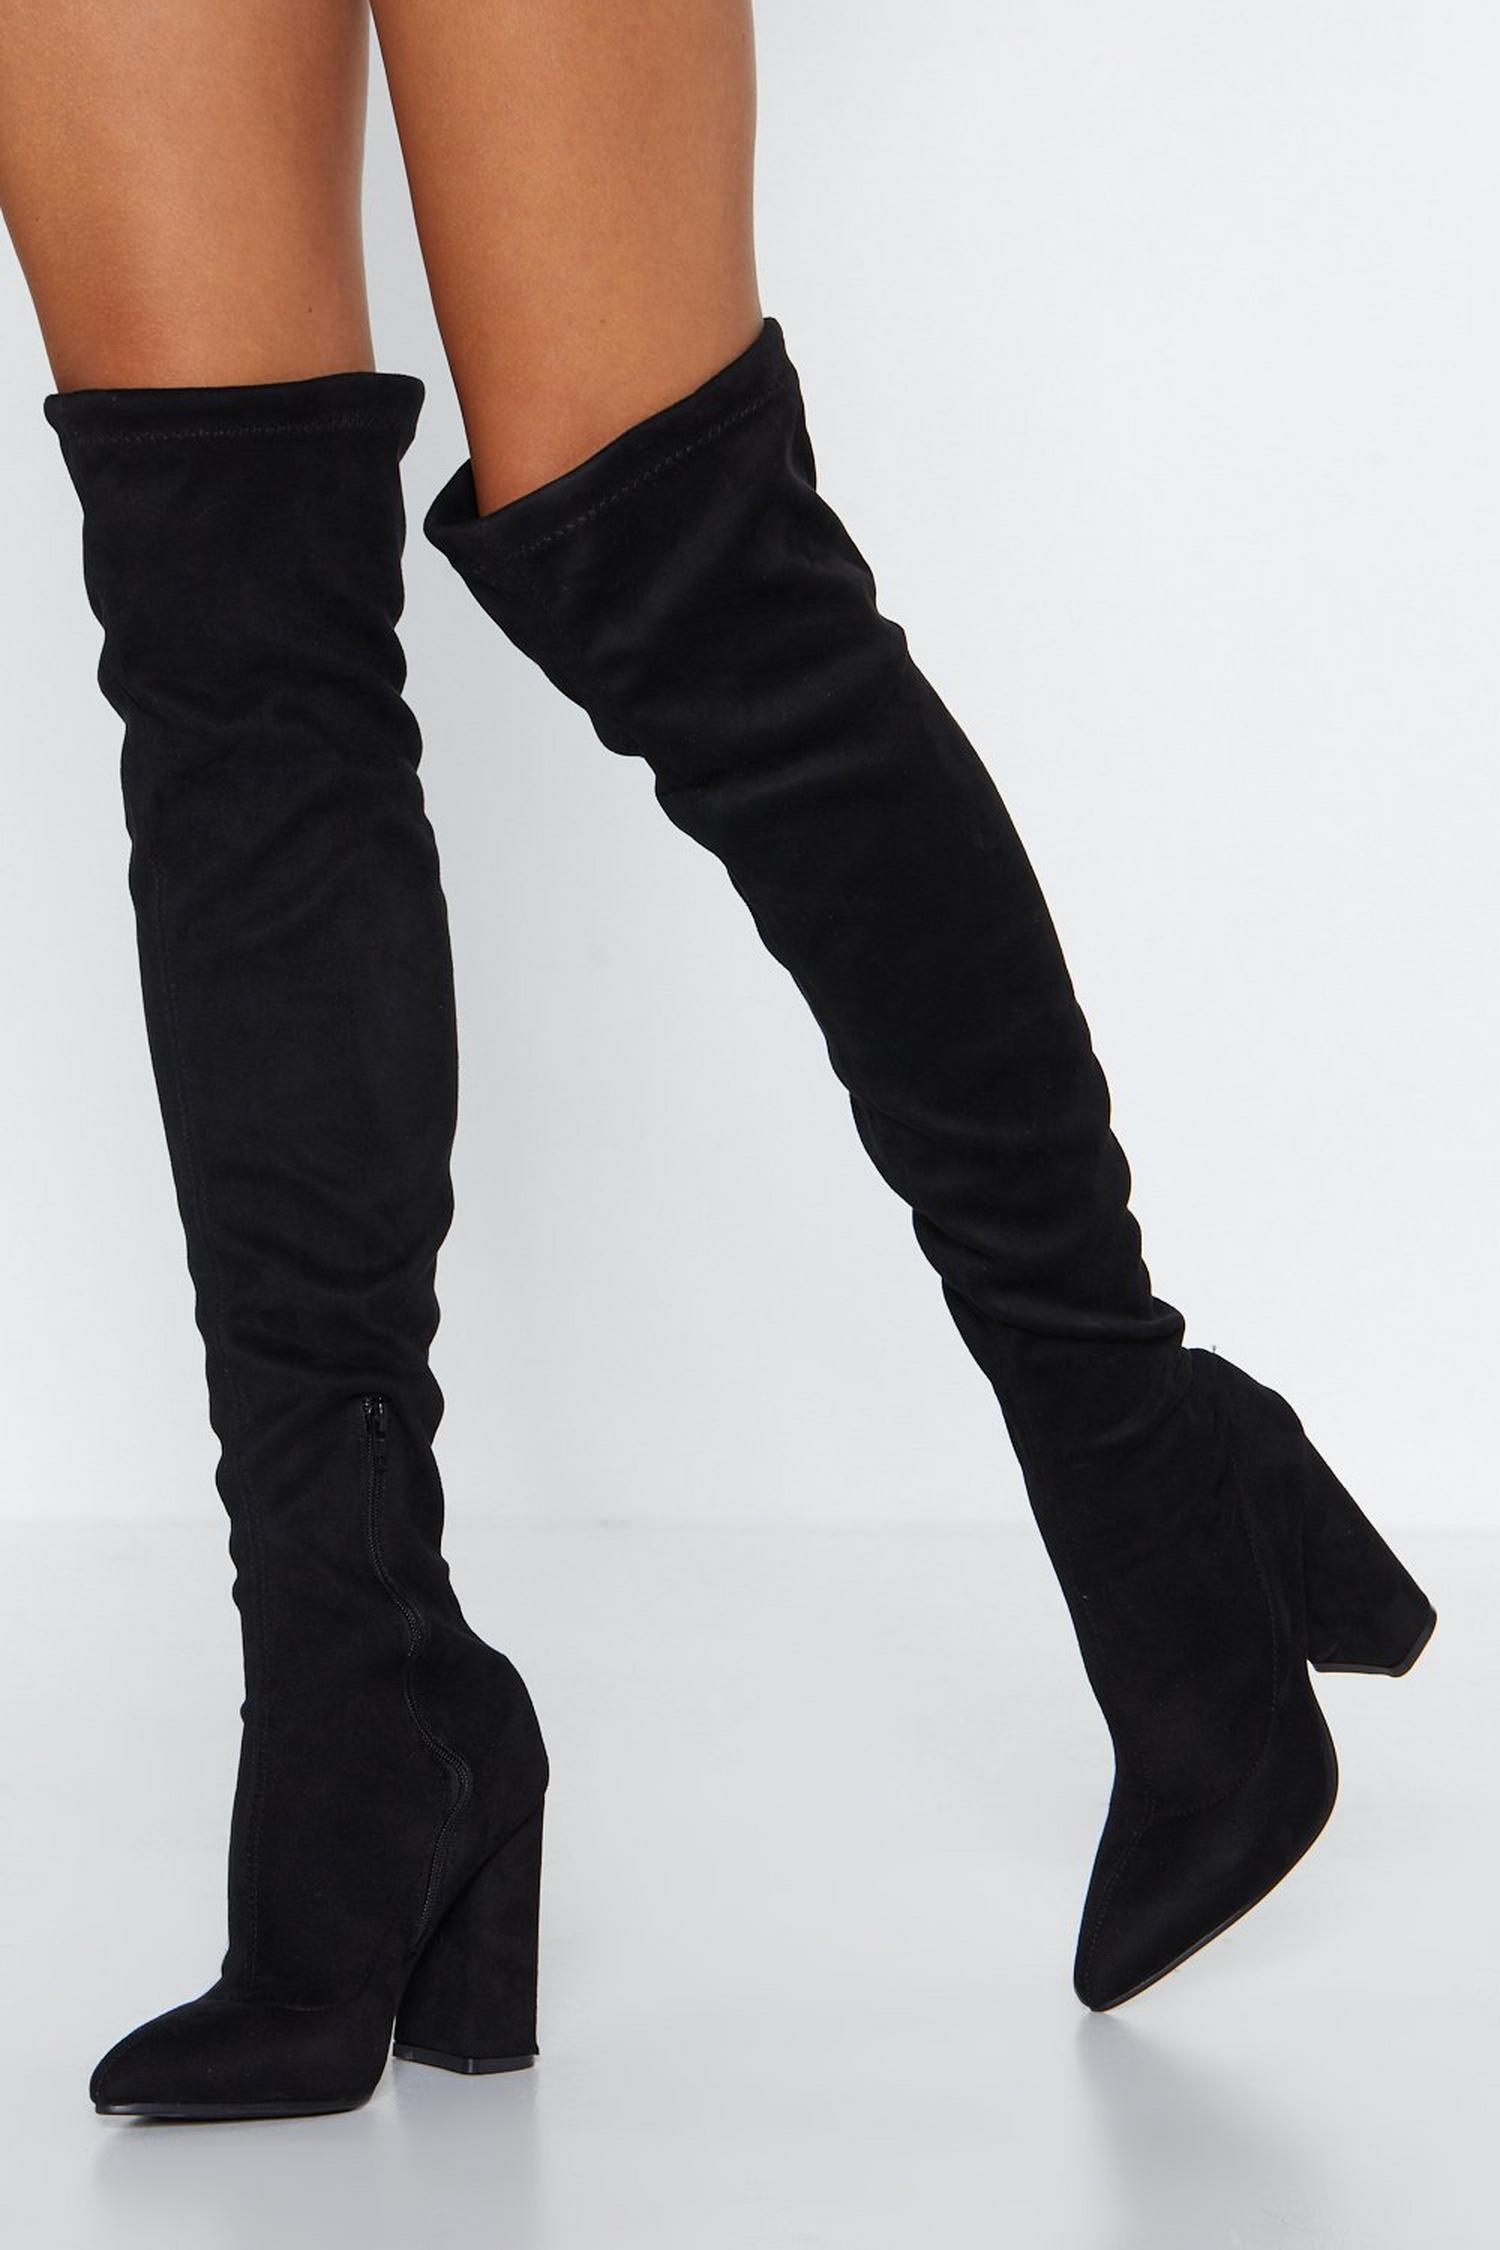 Raise the Stakes Thigh-High Boot | Nasty Gal